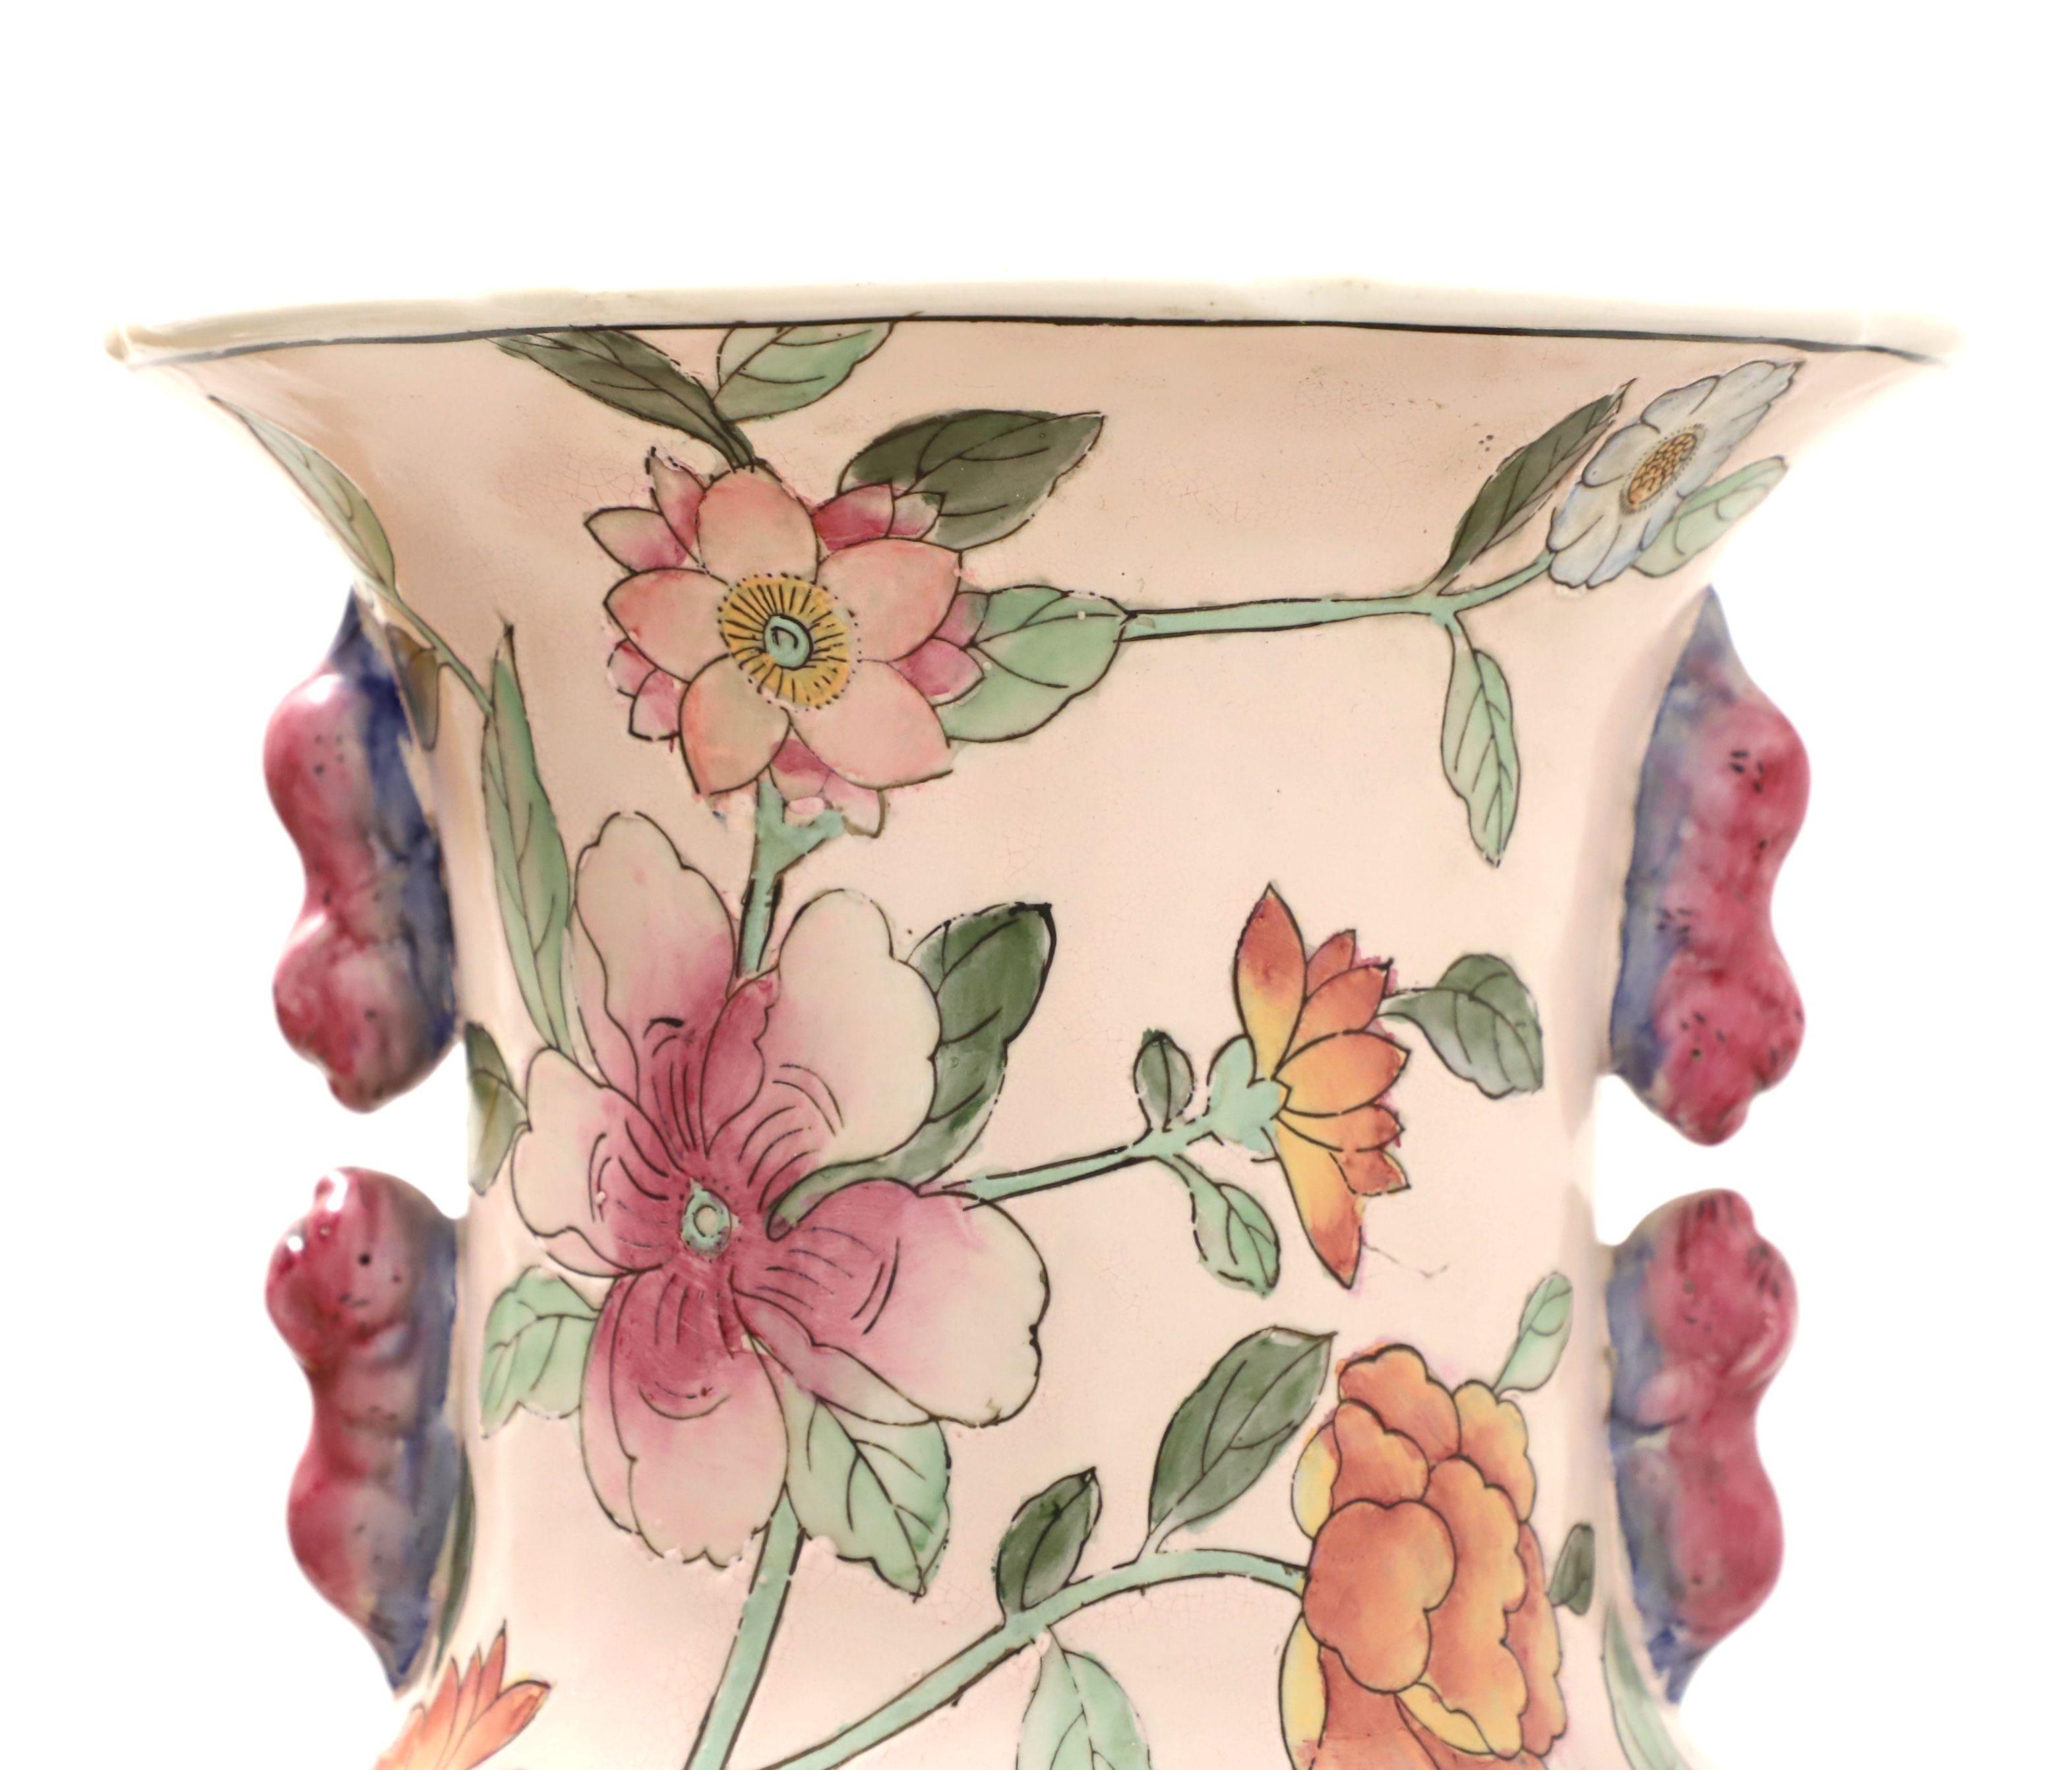 Chinoiserie Dynasty by HEYGILL Hand Painted Pink Foliate & Floral Design Porcelain Vase